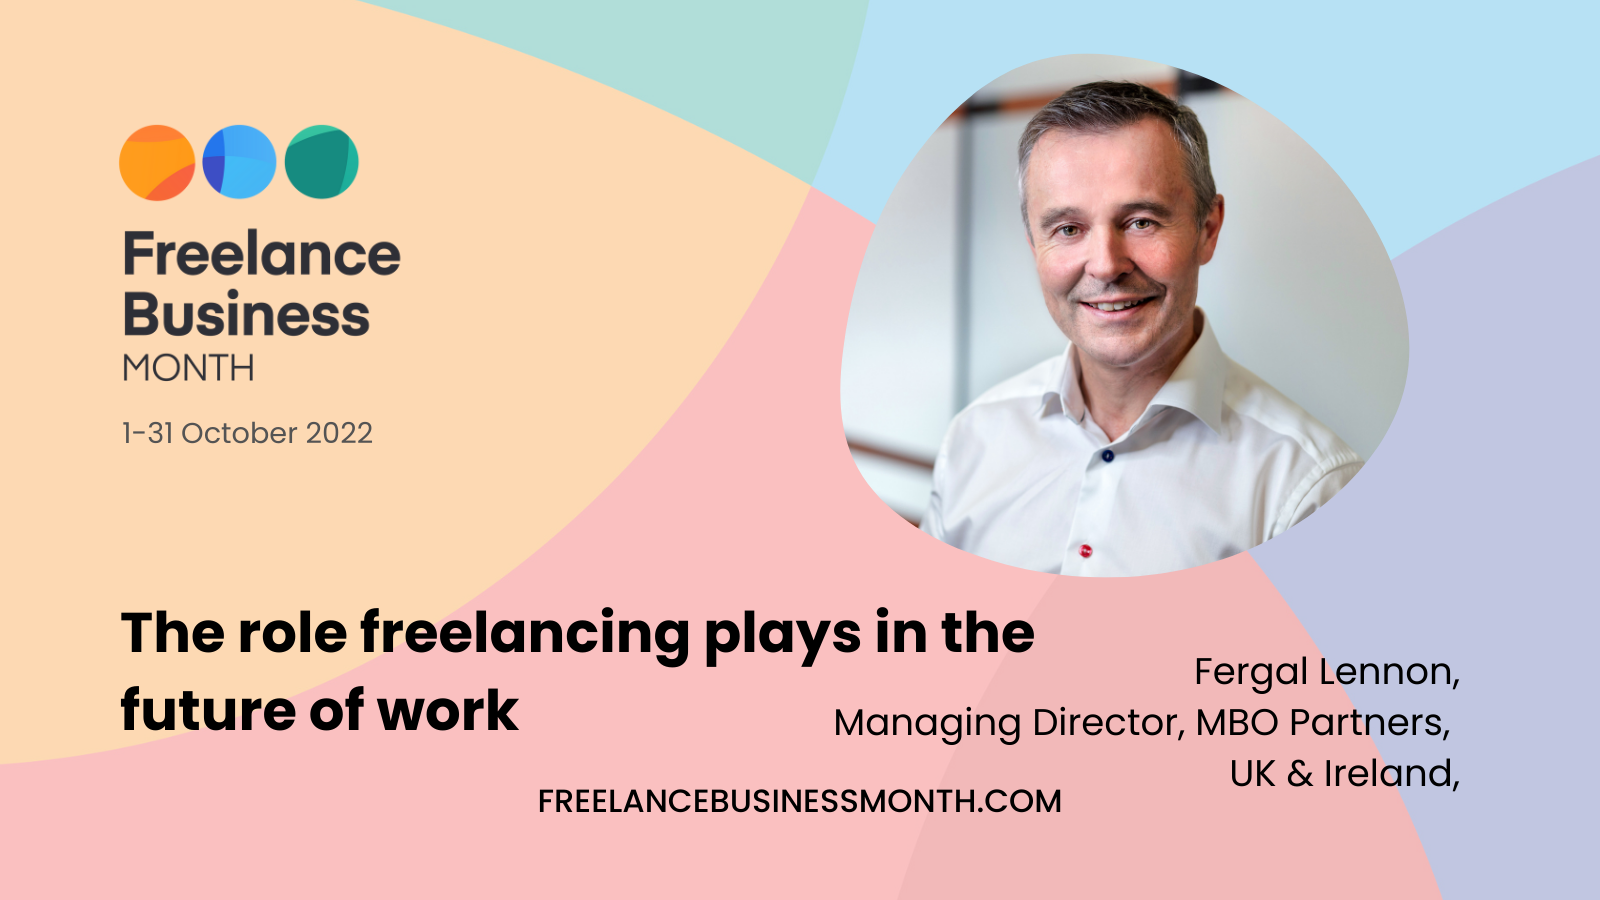 The role freelancing plays in the future of work with Fergal Lennon, MBO partners